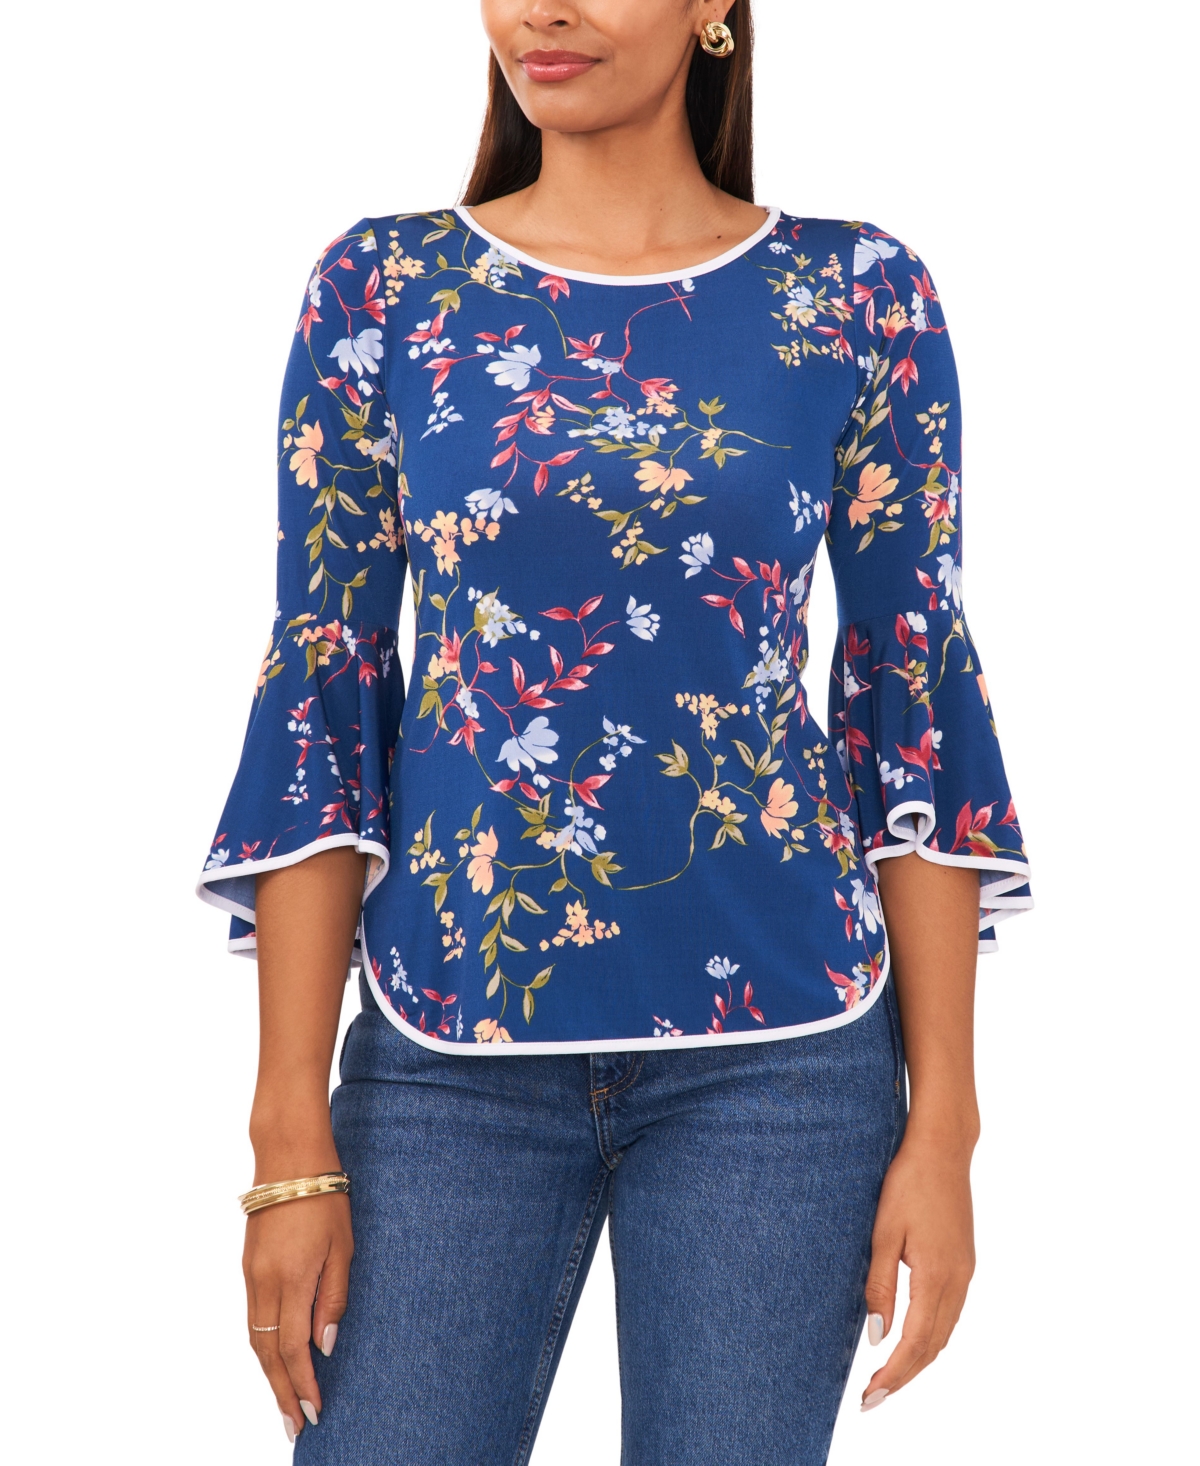 Petite Floral-Print Bell-Sleeve Piped Top - Teal/Multi Floral